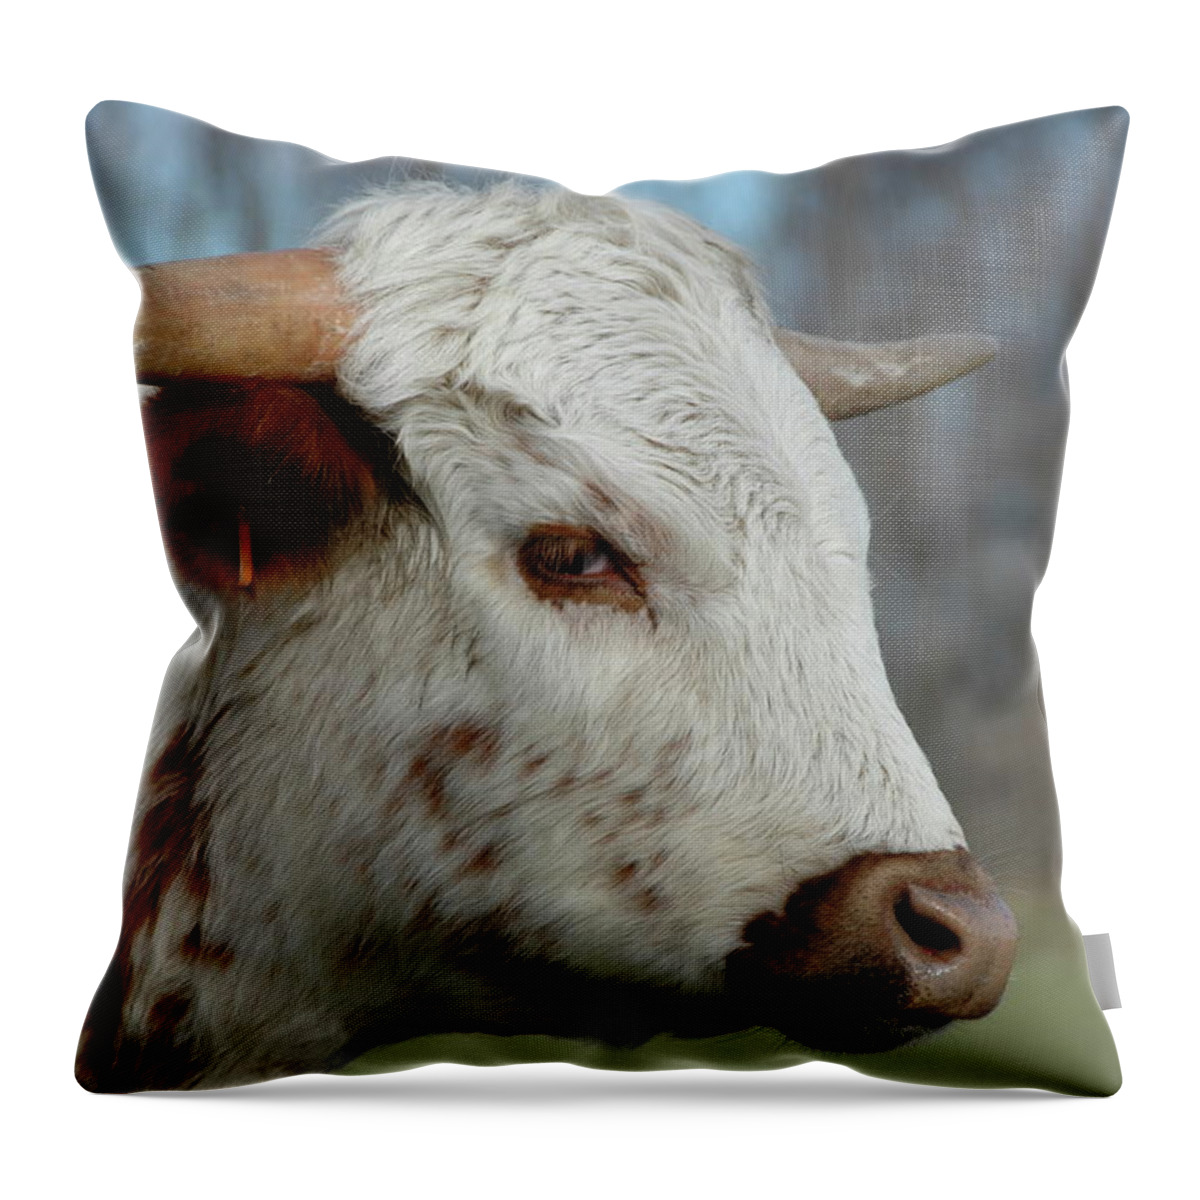 Steer Throw Pillow featuring the photograph Steer Stare Sneer by Marty Klar